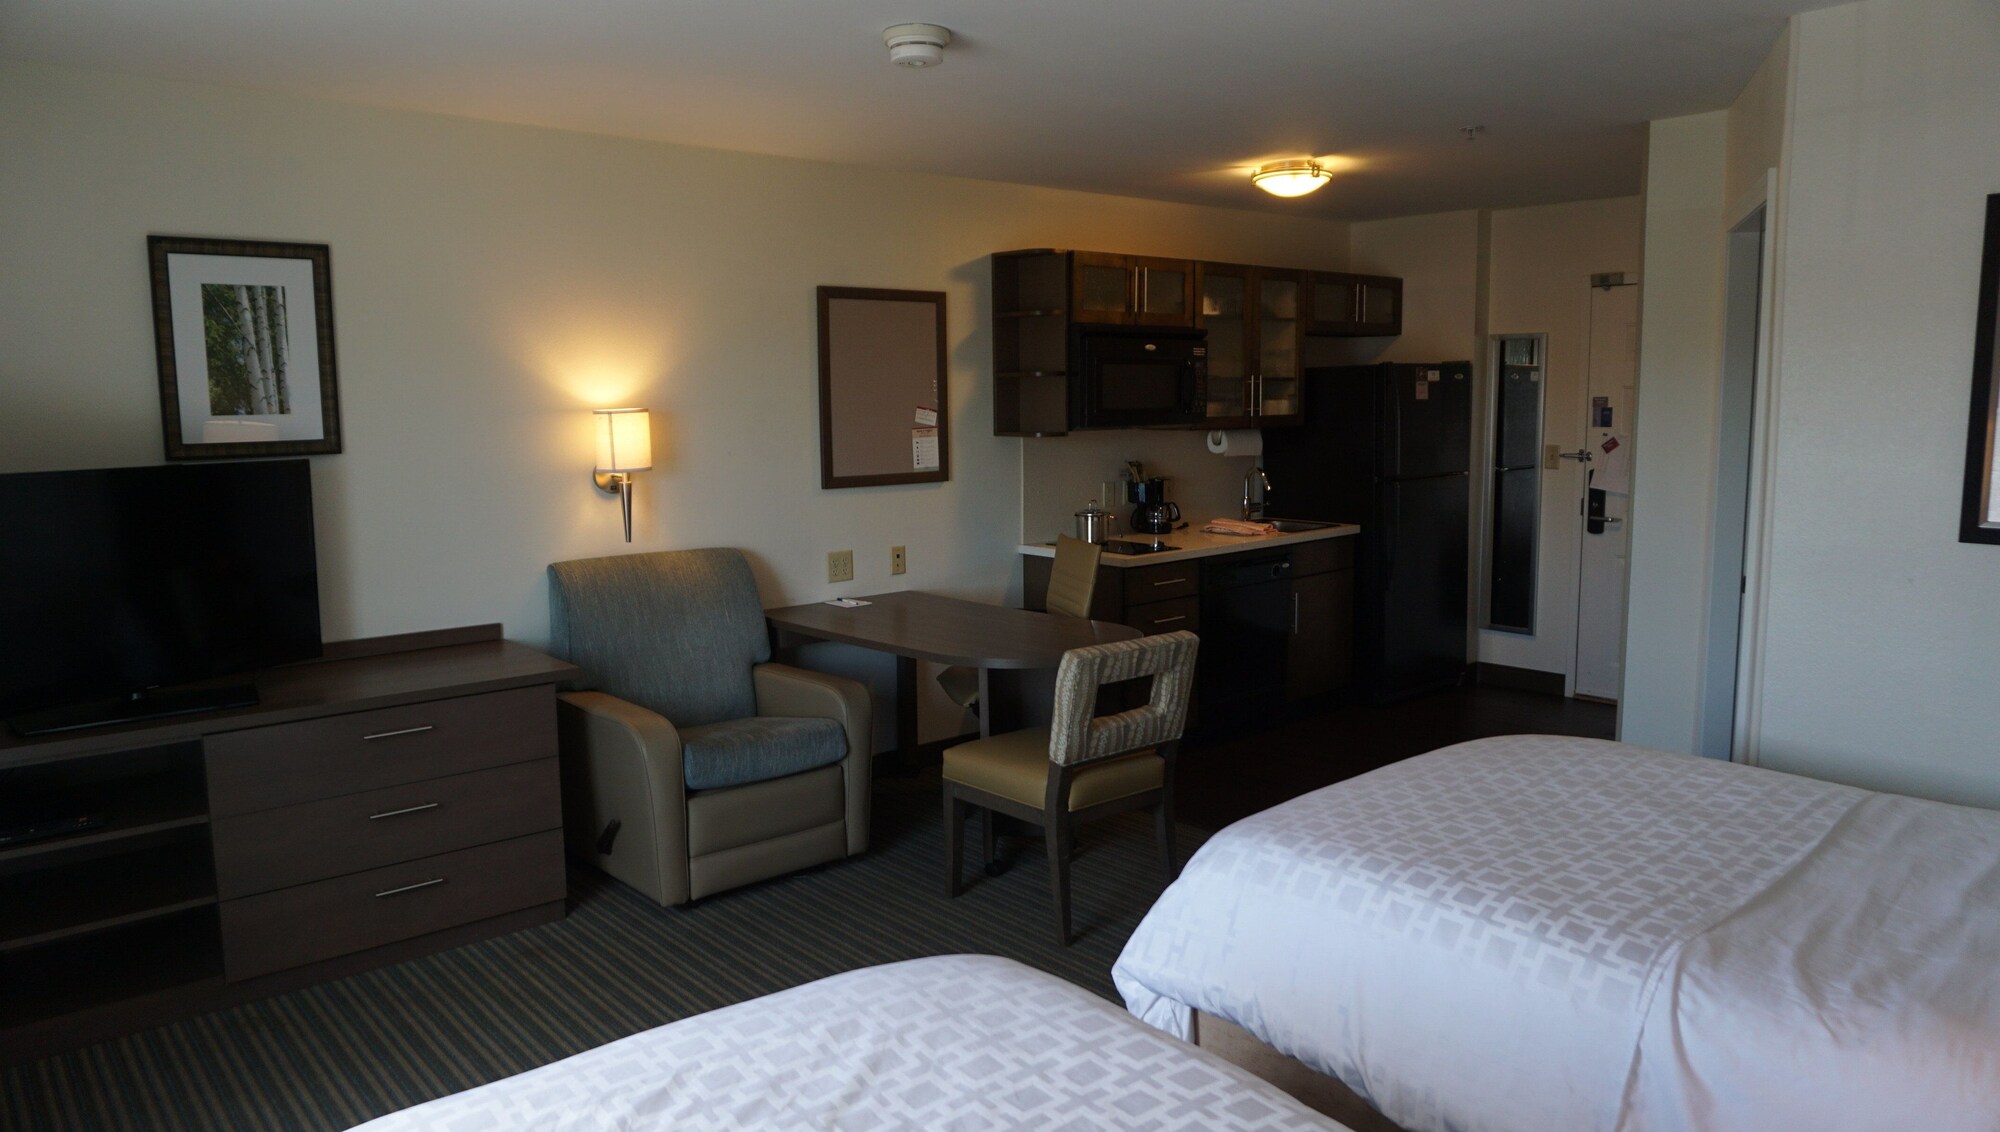 Candlewood Suites West Springfield